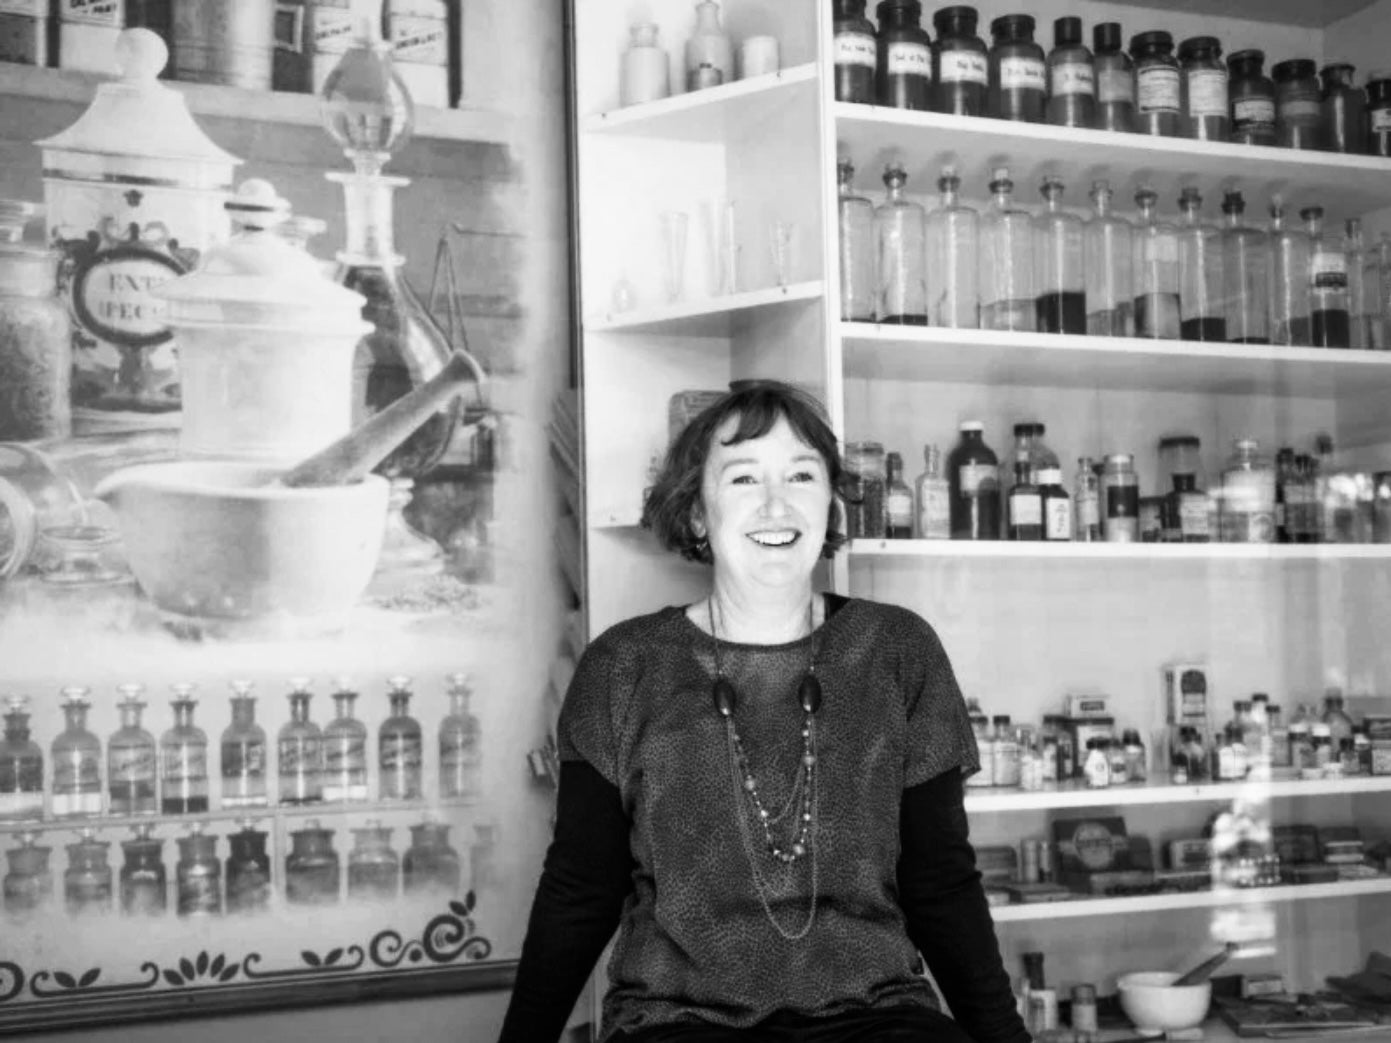 Founder Carol Priest radiating joy in the shop, reflecting the brand&#39;s vibrant essence and leadership.